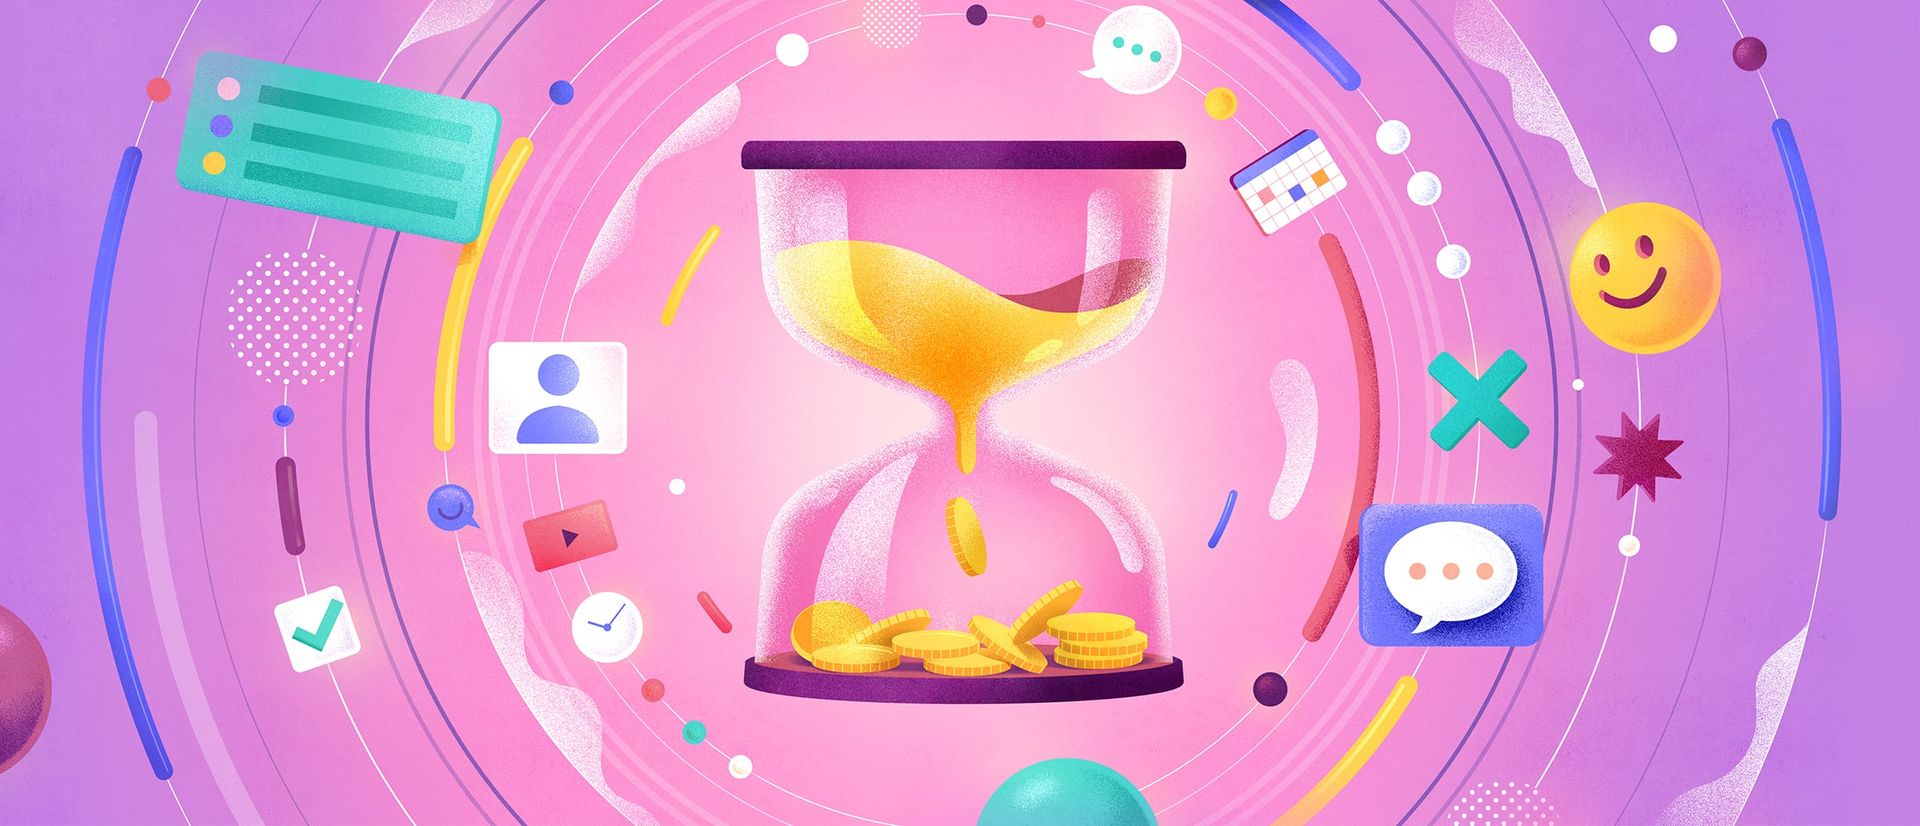 Hourglass filled with sand and money, with several elements revolving around it